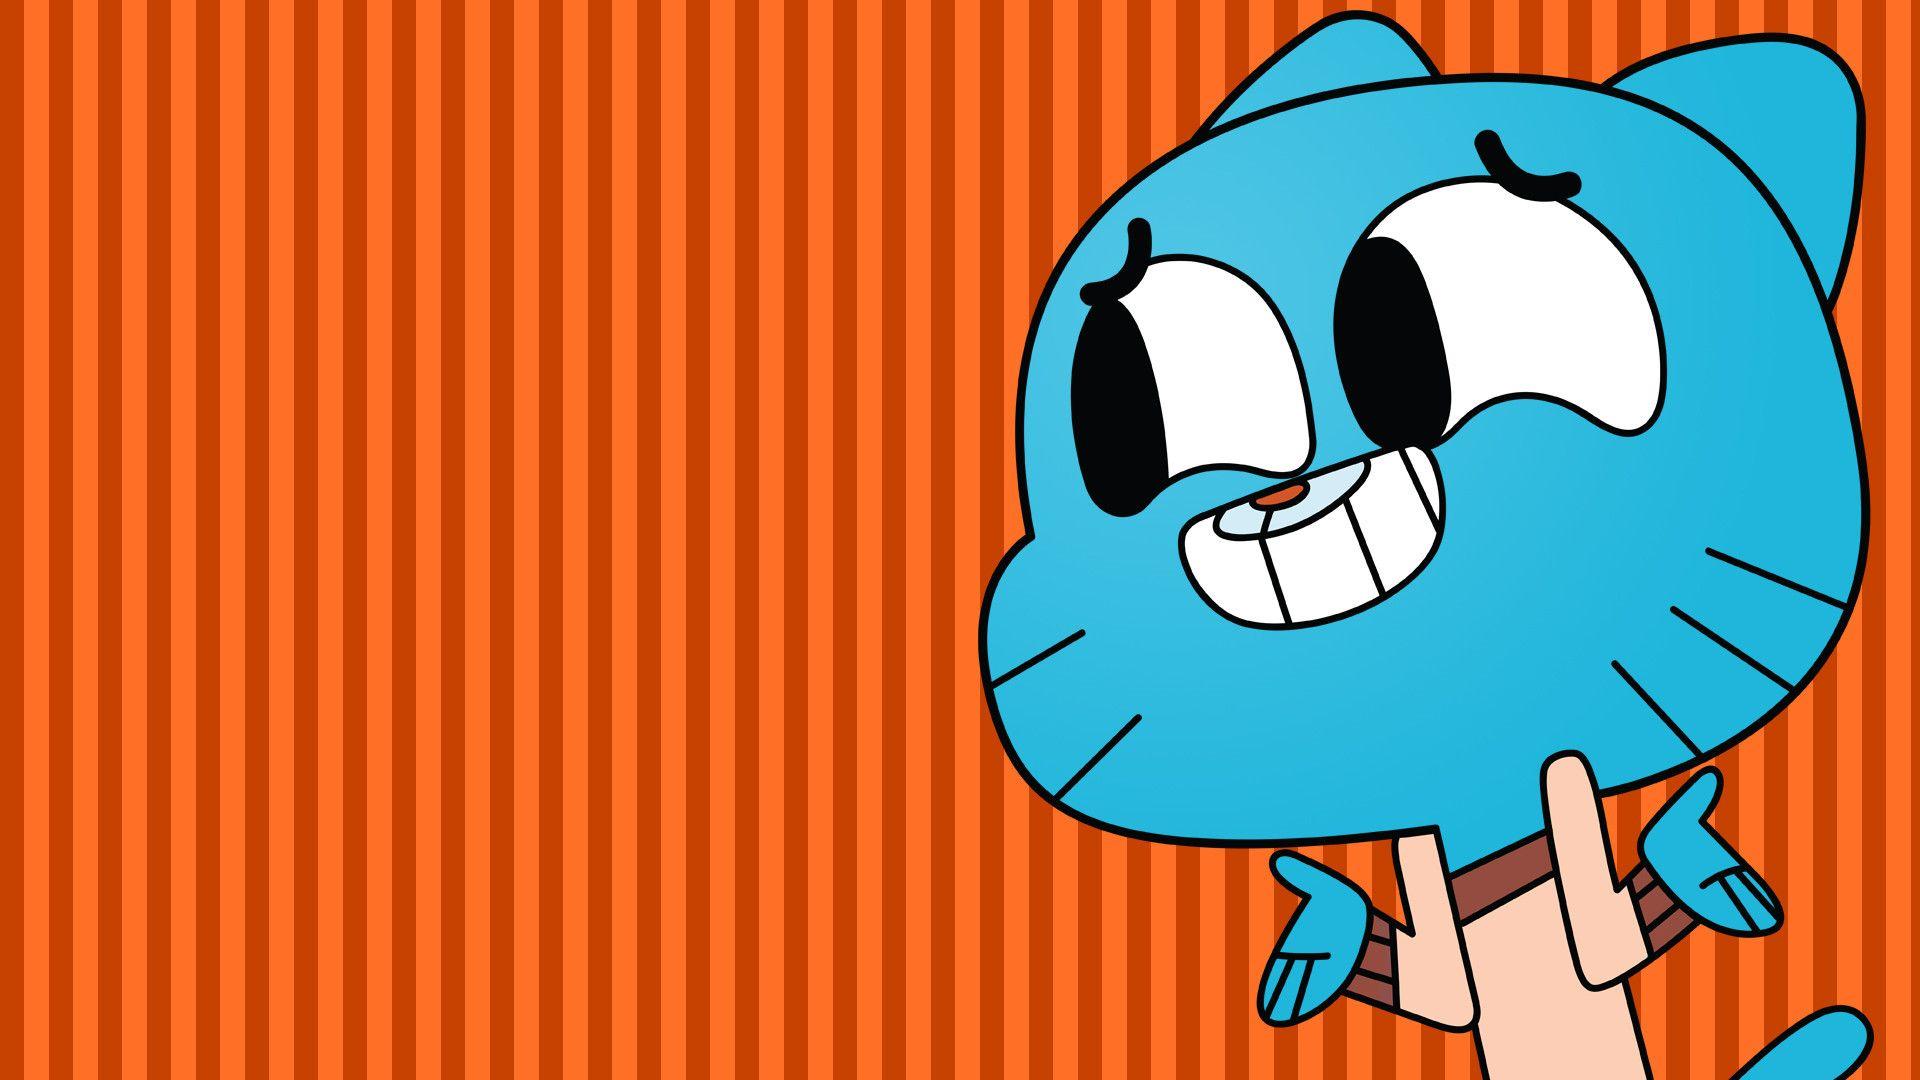 The Amazing World of Gumball Wallpapers.